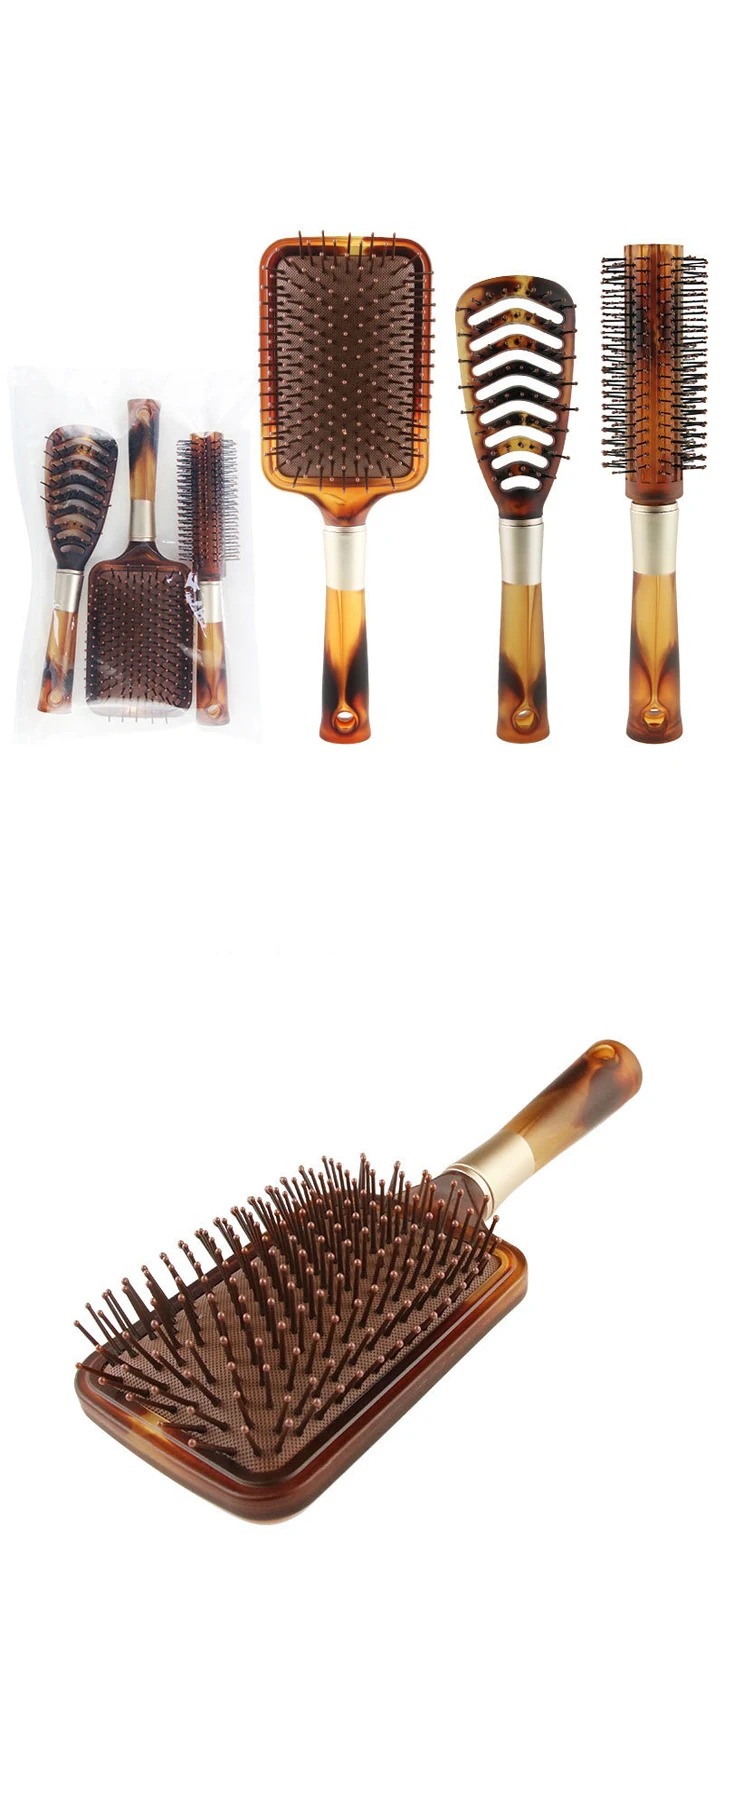 Hot selling Household Women Curly Hairdressing Comb Set Daily Use Hair Comb Set Eco-friendly Airbag Massage Hair Comb Set